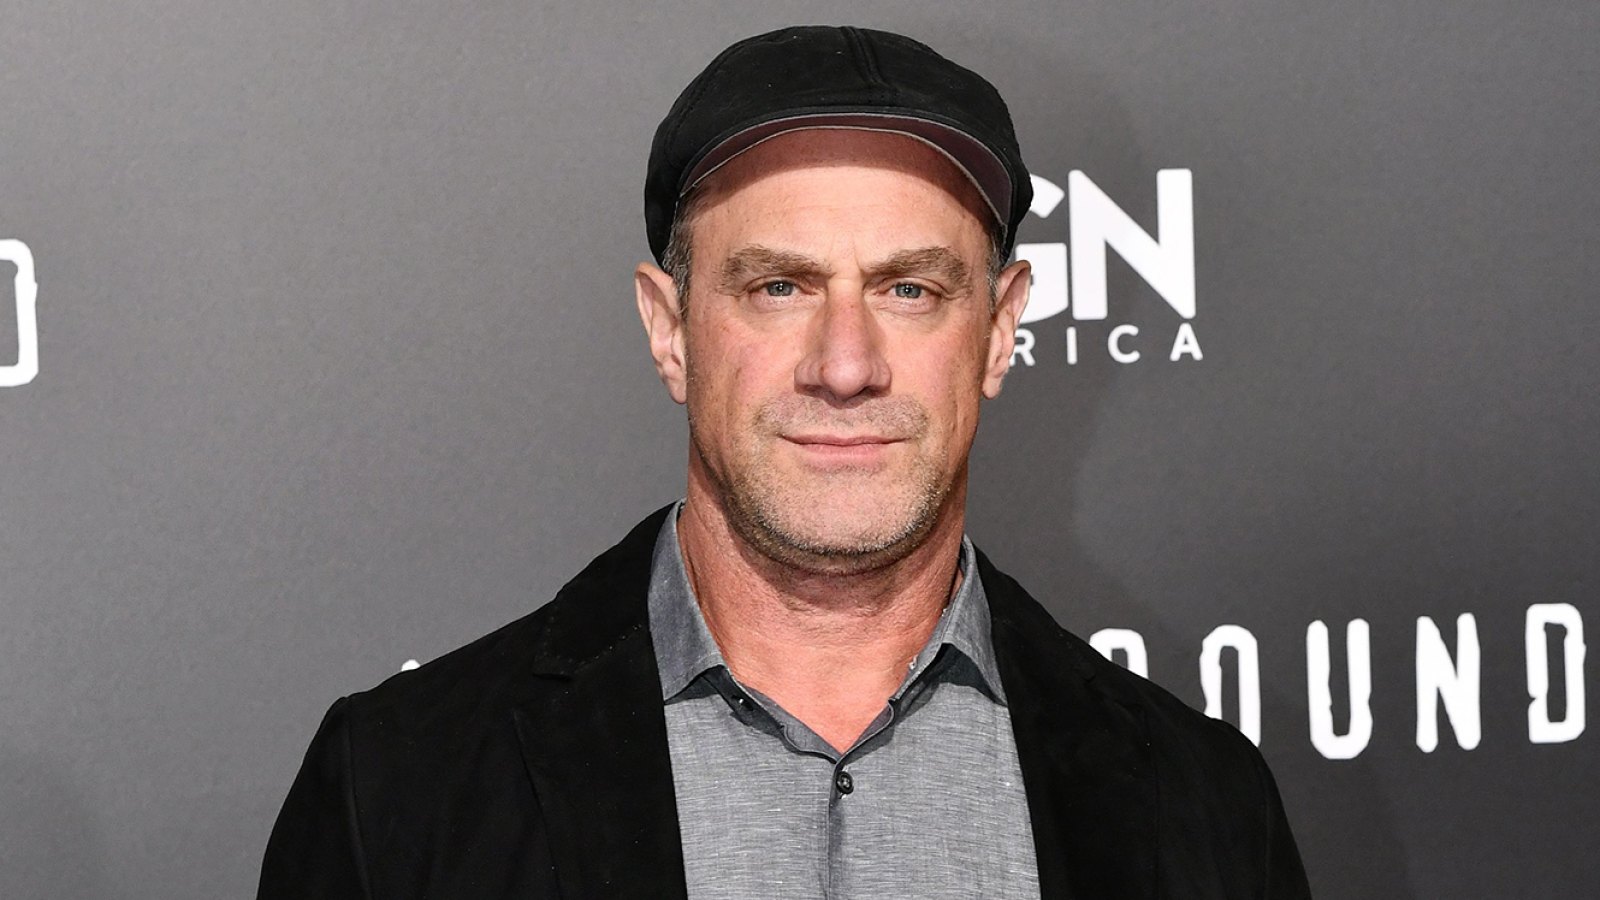 Christopher Meloni to Revive His ‘Law & Order: SVU’ Character, Elliot Stabler, in New TV Spinoff